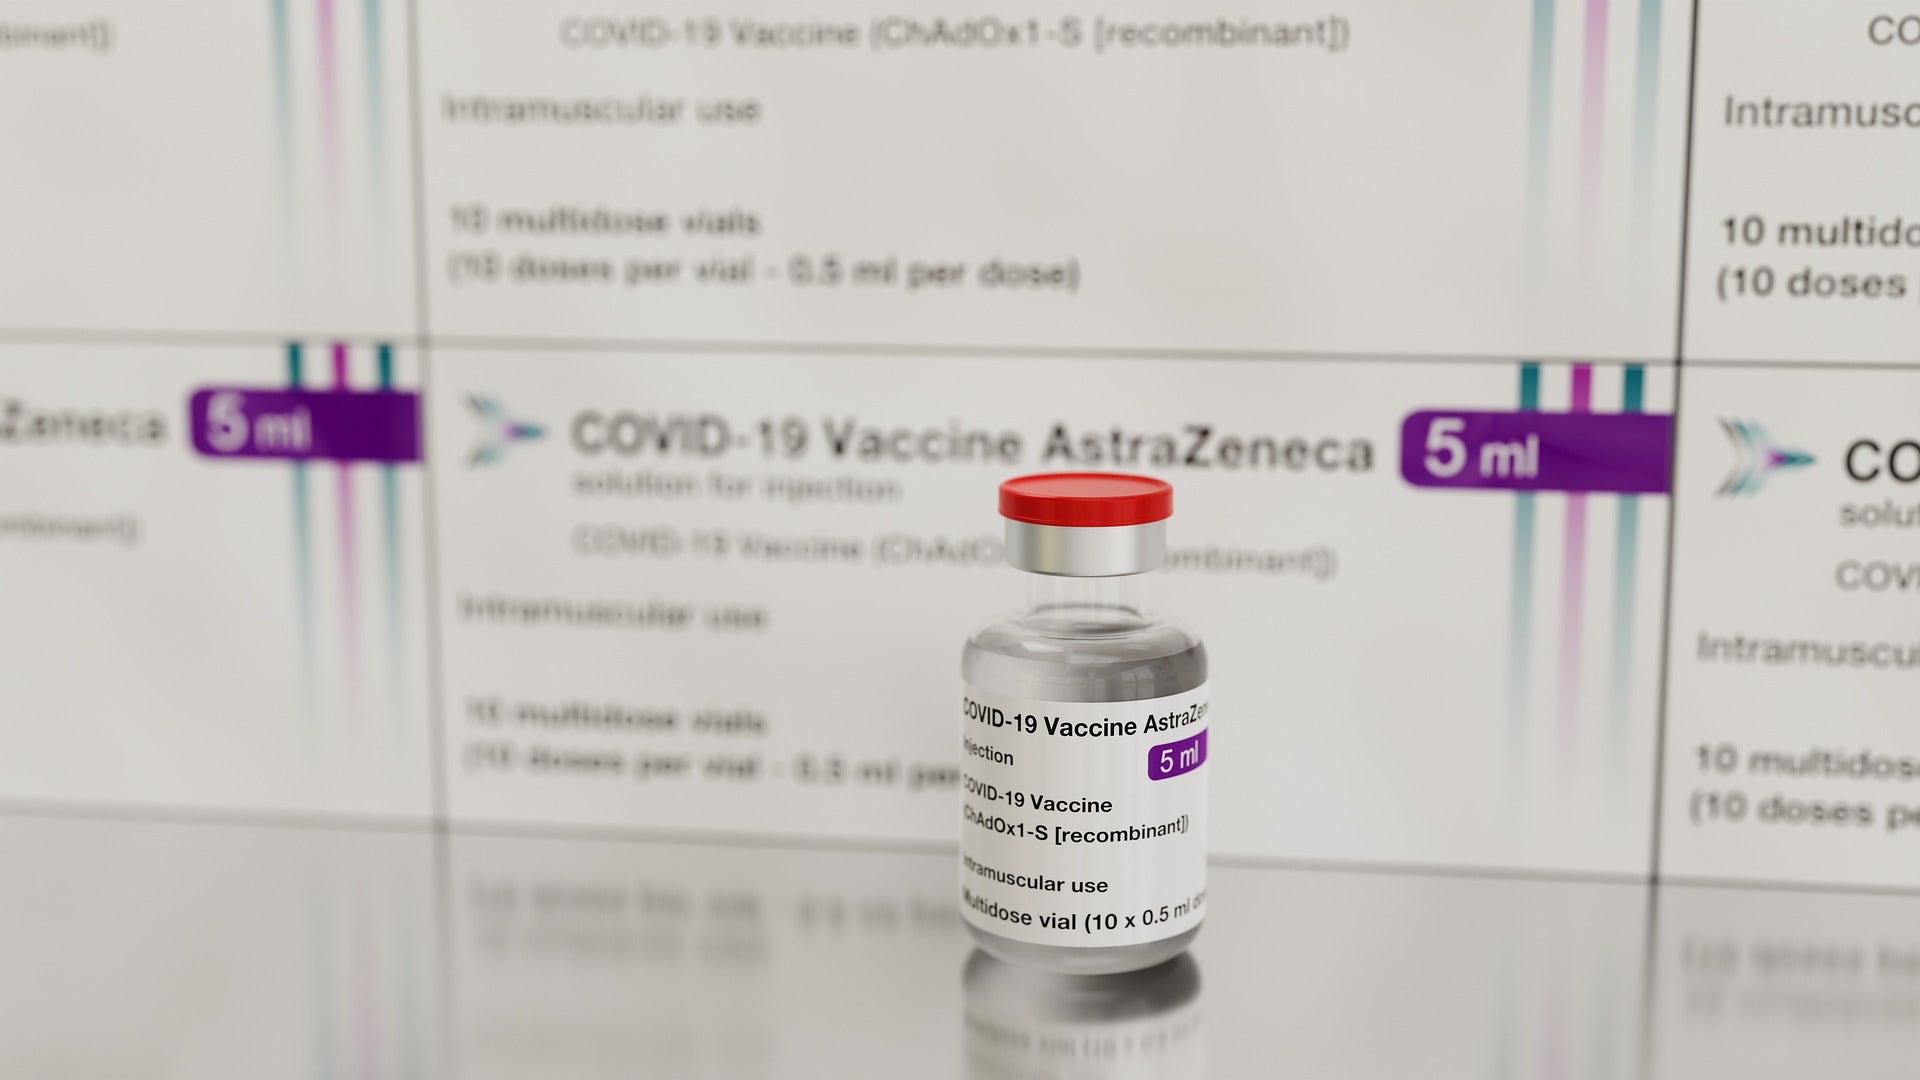 UK Government Will Not Buy More AstraZeneca's COVID-19 Treatment